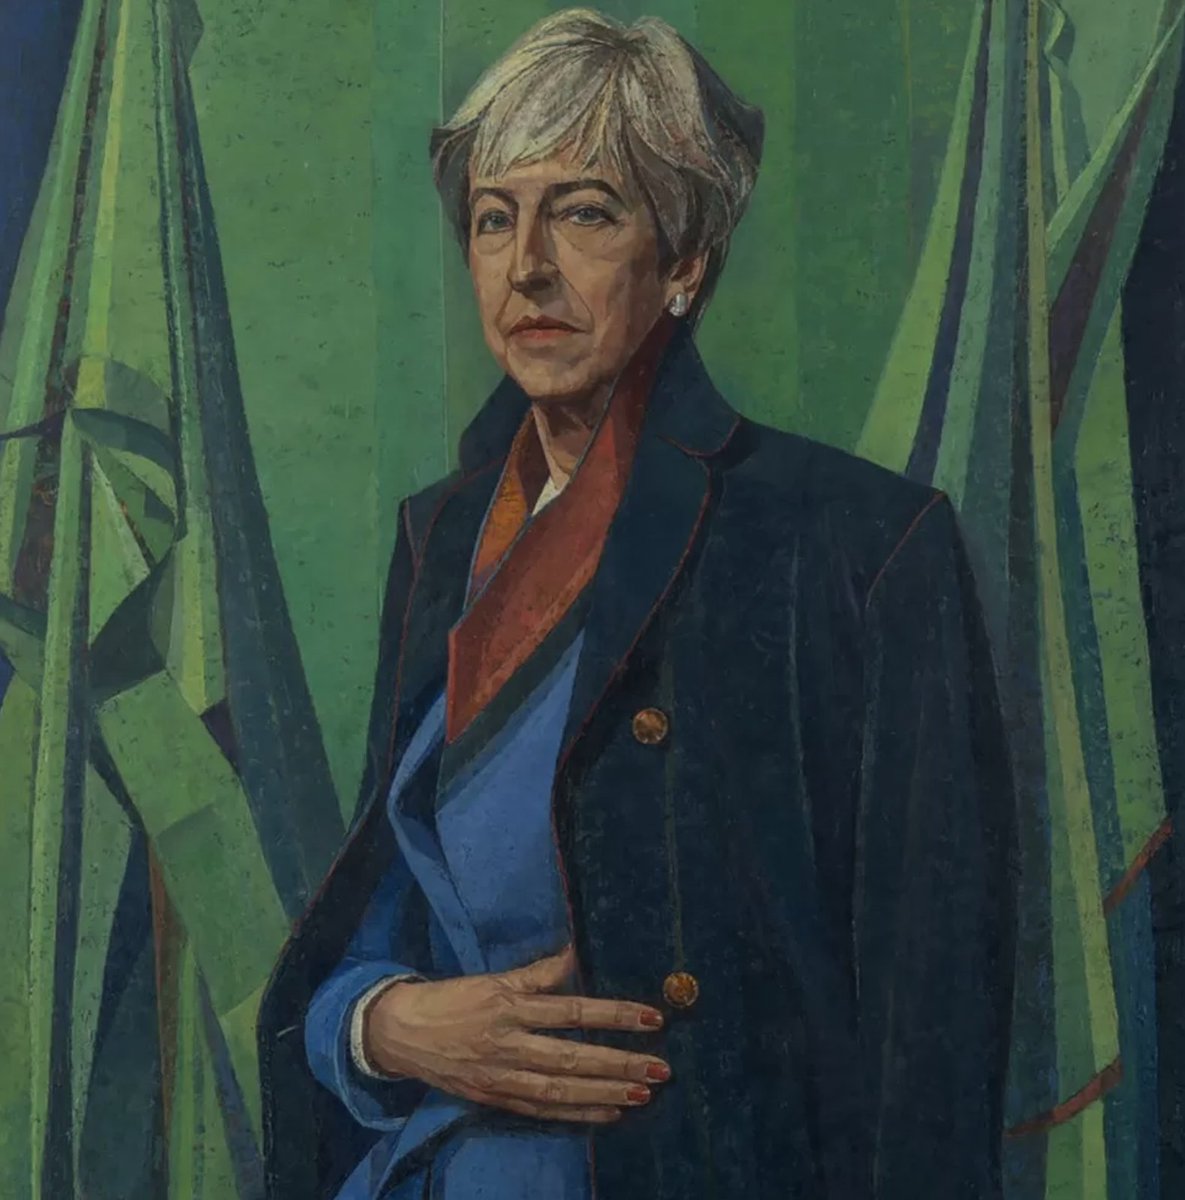 Parliament pays tribute to Theresa May with a £28,000 painting of Jon Pertwee.